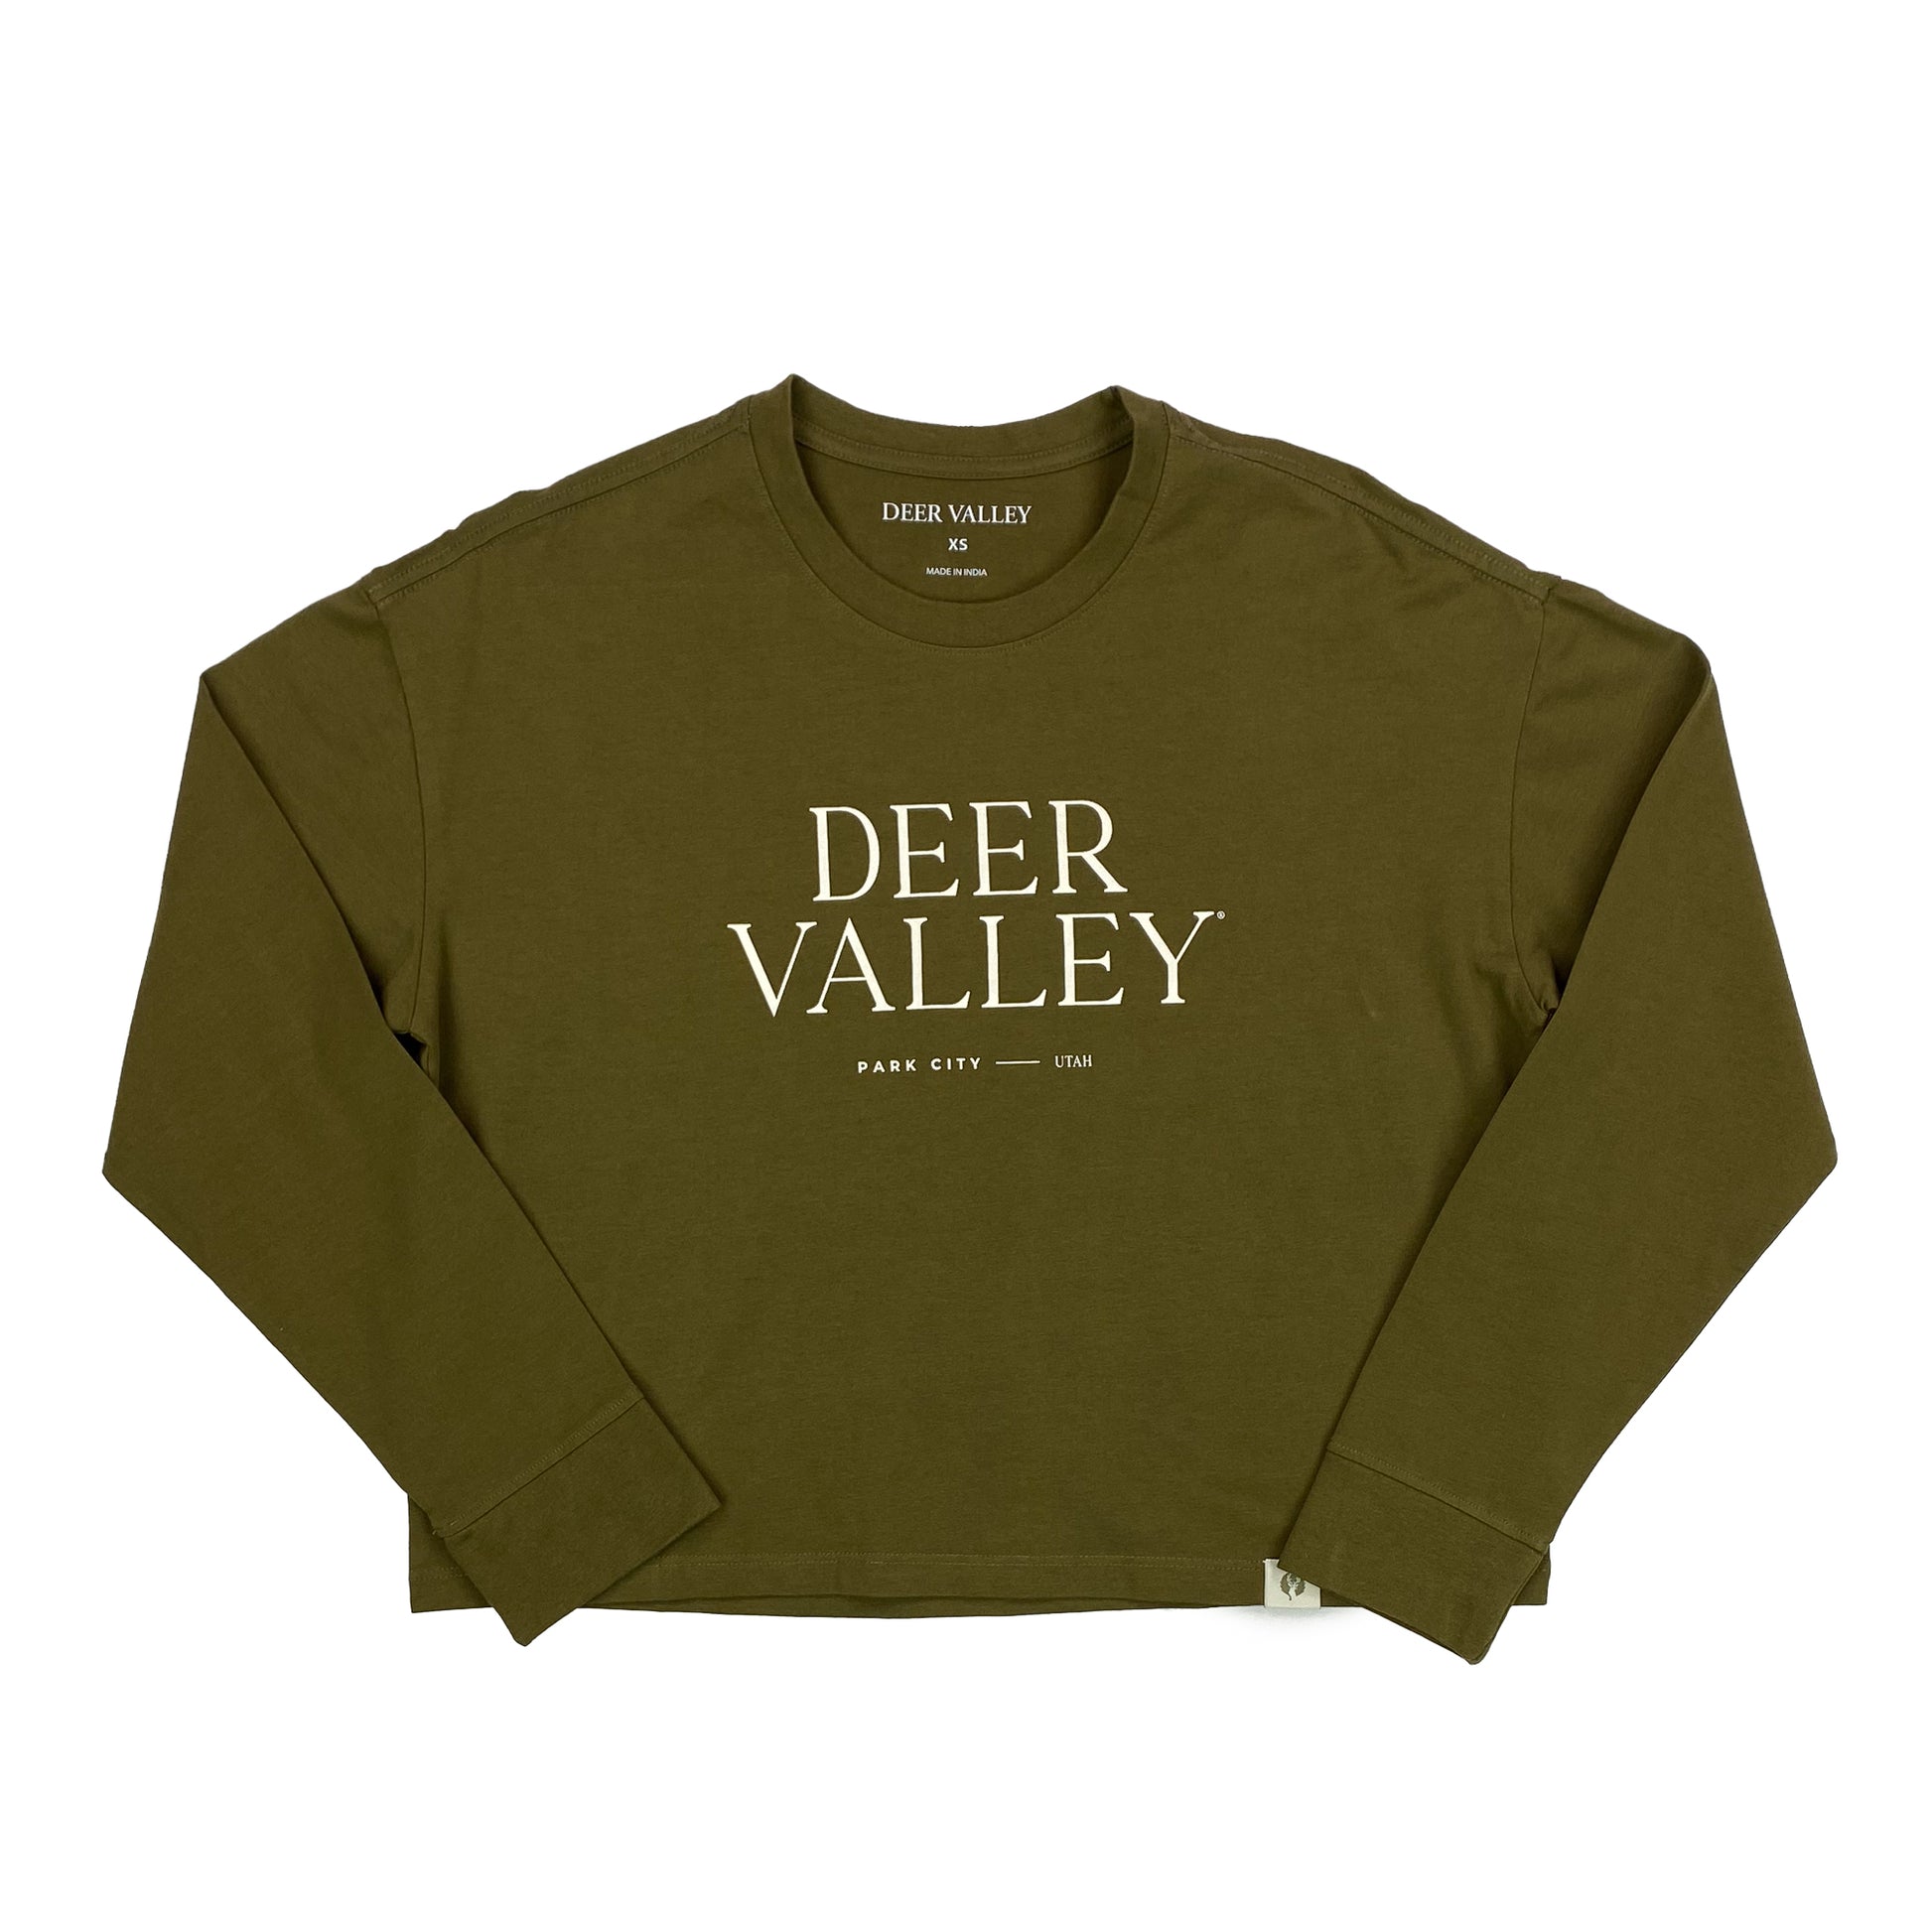 Olive colored womens cropped deer valley long sleeve t shirt